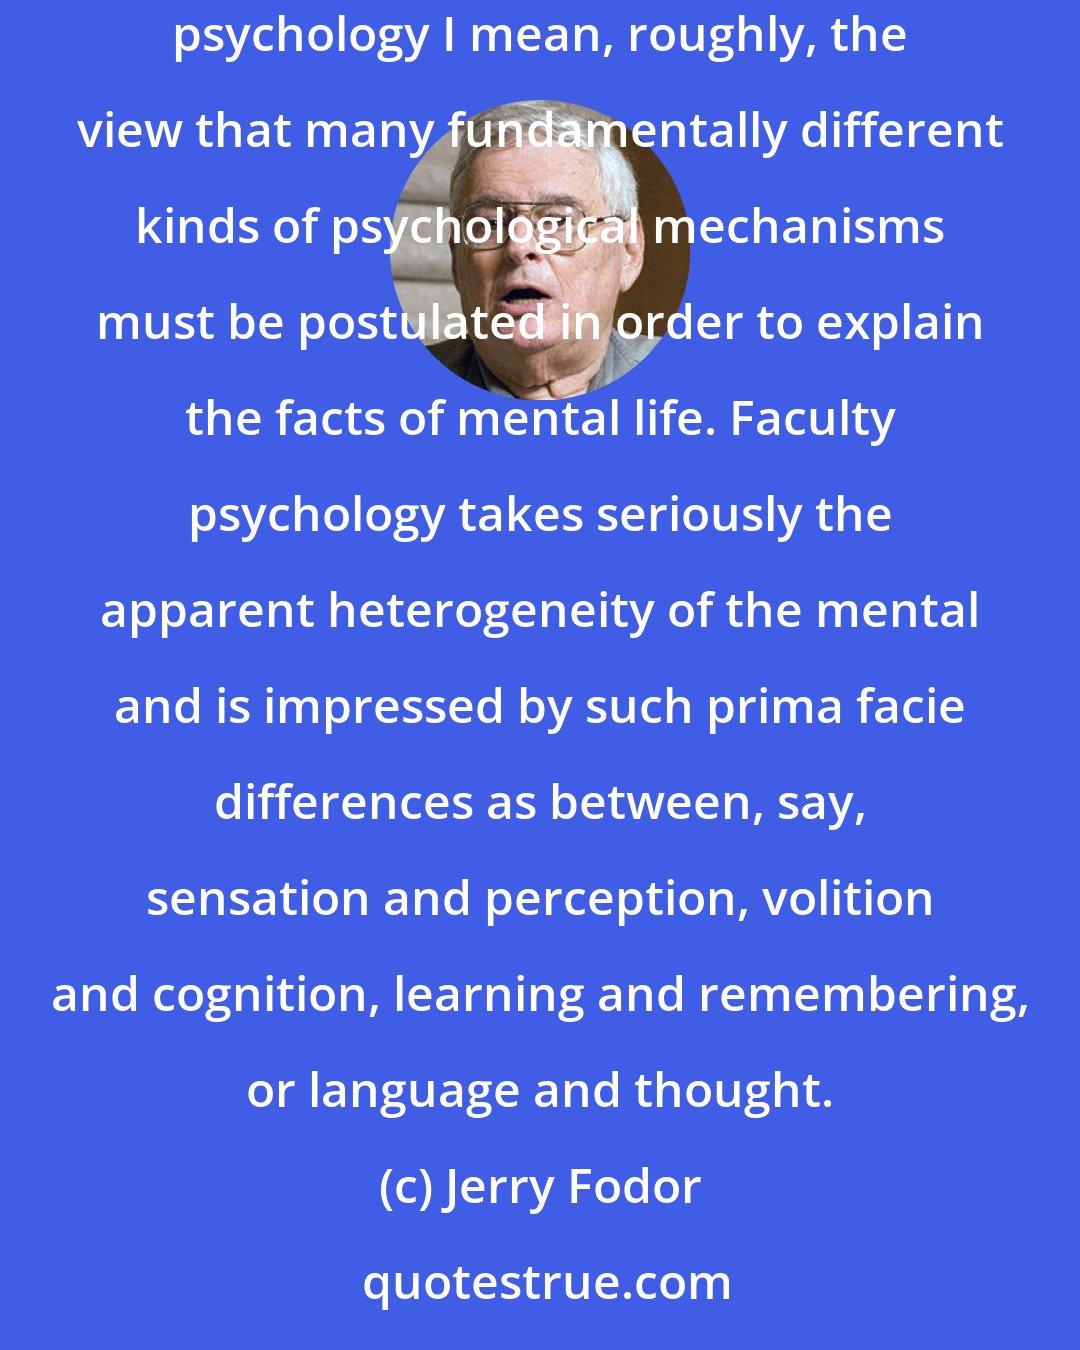 Jerry Fodor: Faculty Psychology is getting to be respectable again after centuries of hanging around with phrenologists and other dubious types. By faculty psychology I mean, roughly, the view that many fundamentally different kinds of psychological mechanisms must be postulated in order to explain the facts of mental life. Faculty psychology takes seriously the apparent heterogeneity of the mental and is impressed by such prima facie differences as between, say, sensation and perception, volition and cognition, learning and remembering, or language and thought.